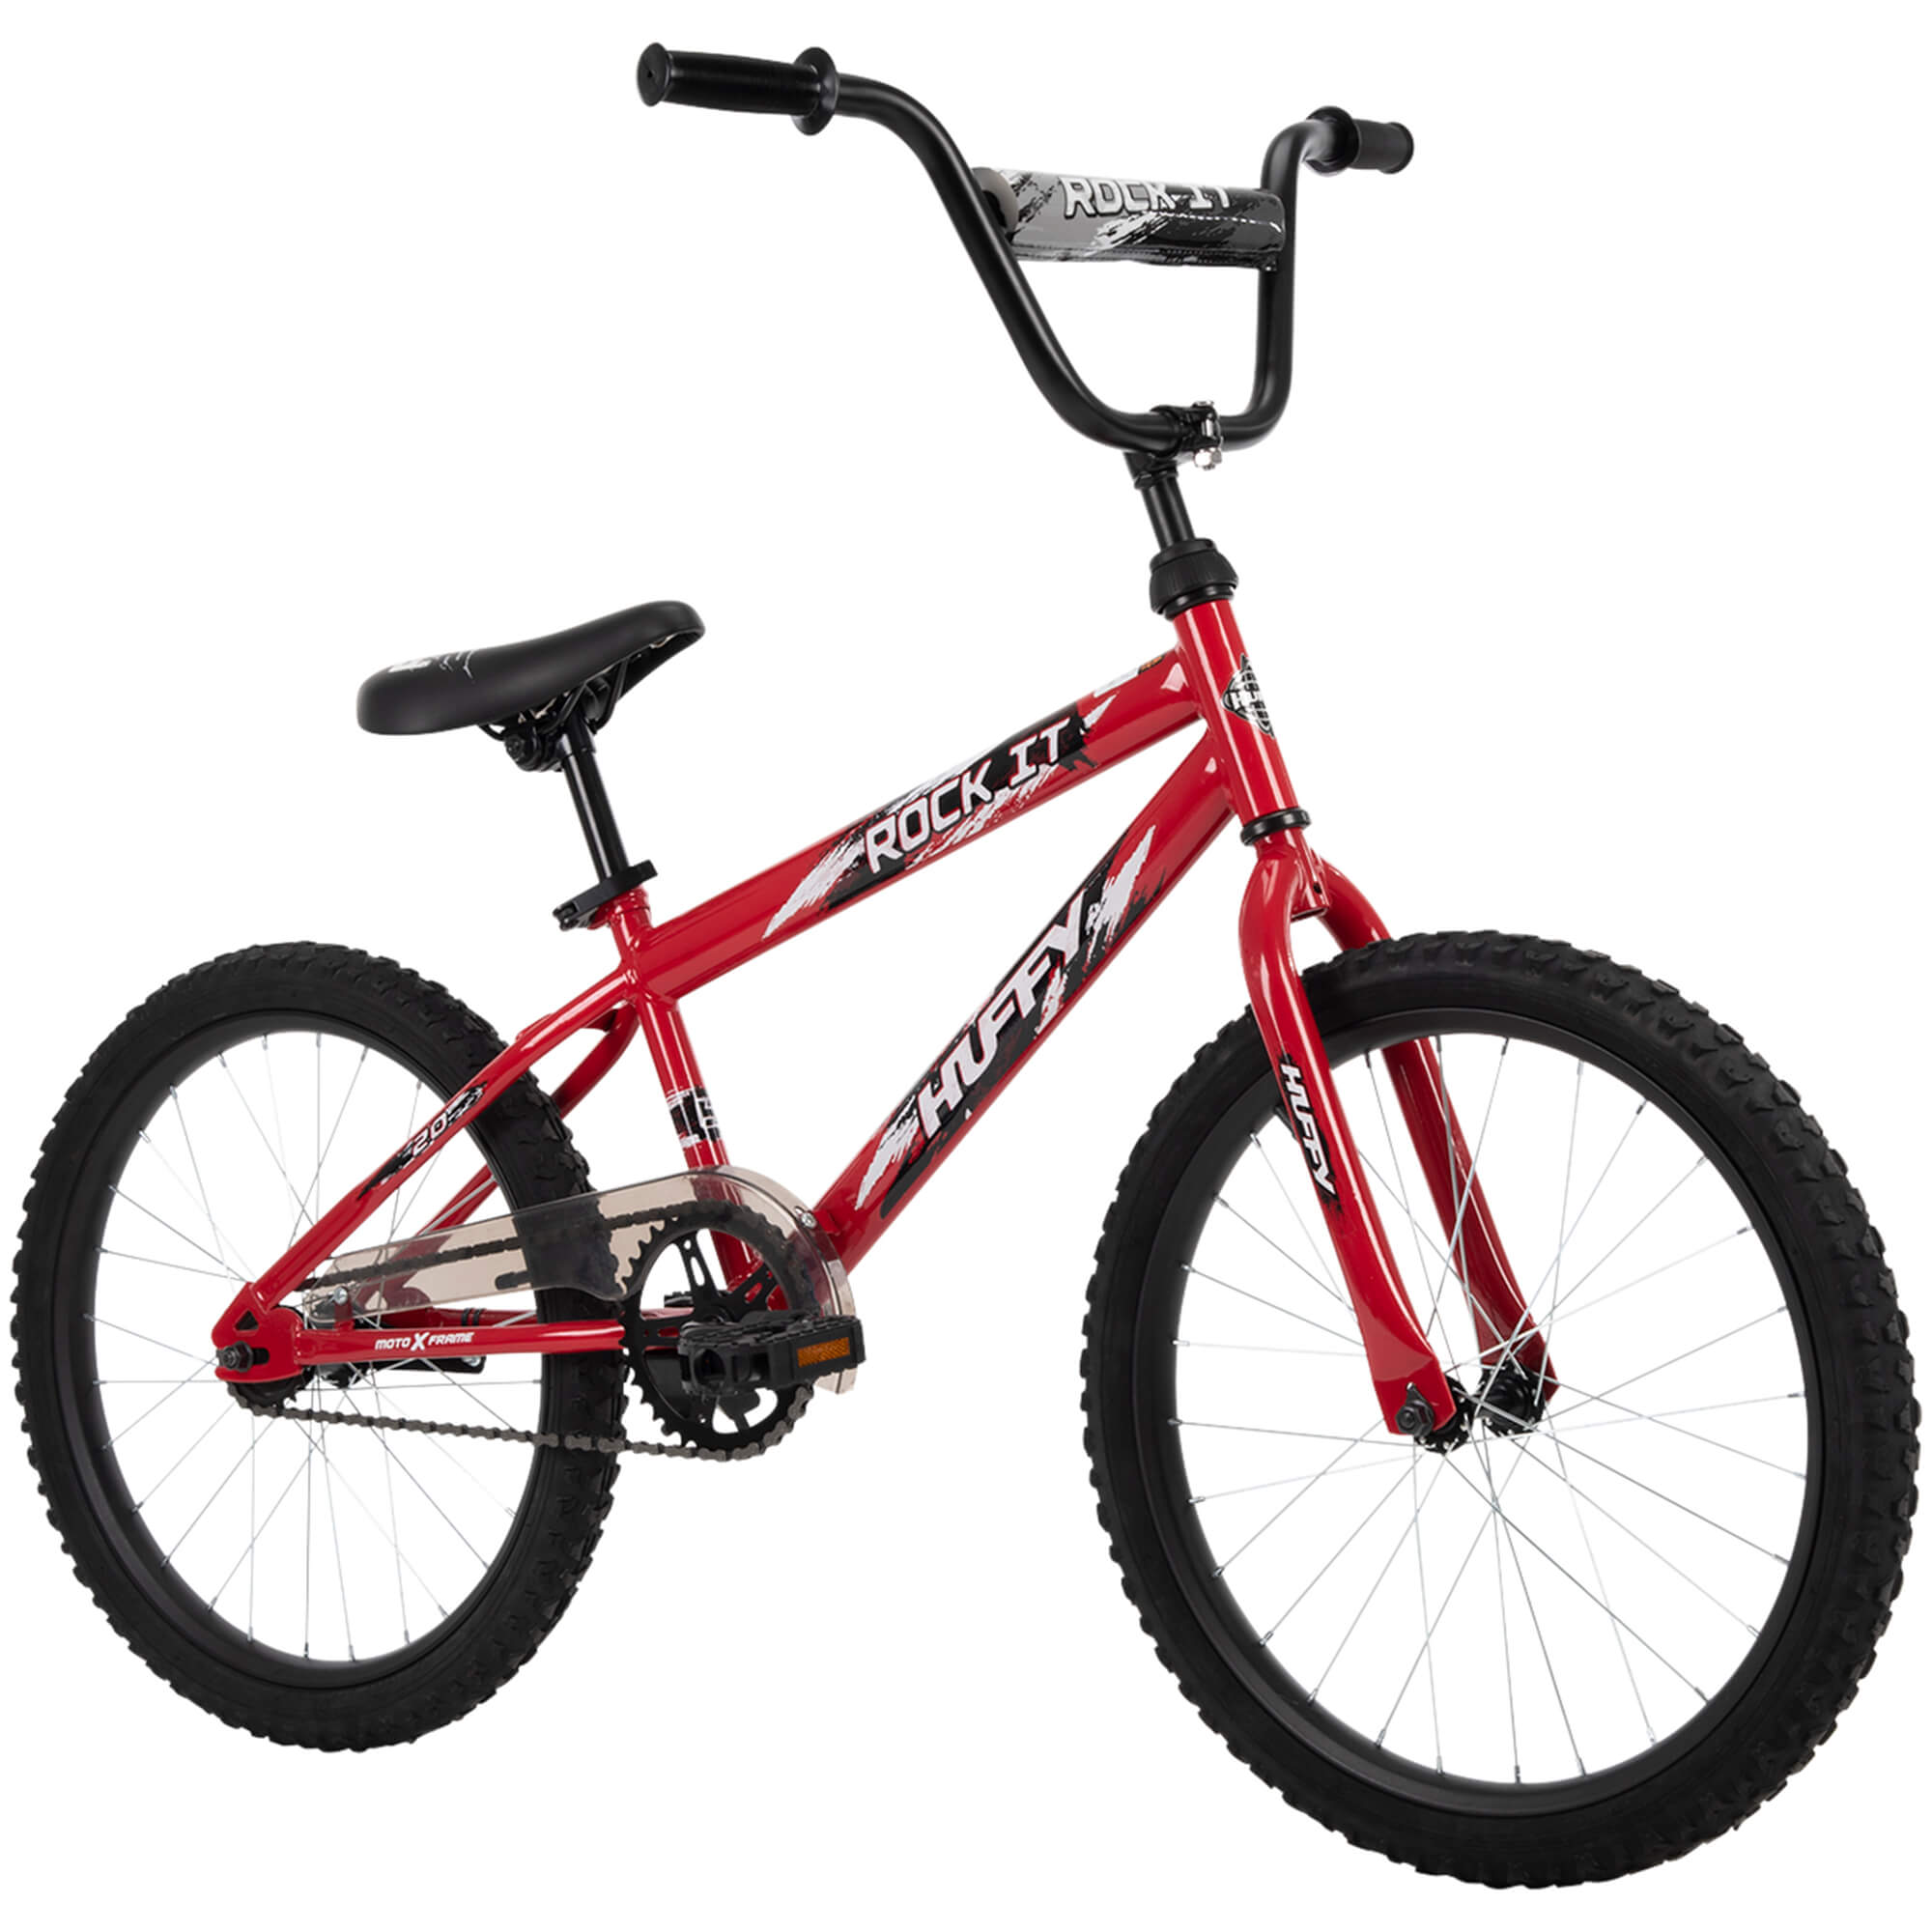 Huffy 20" Rock It Kids Bike for Boys, Hot Red - image 1 of 8